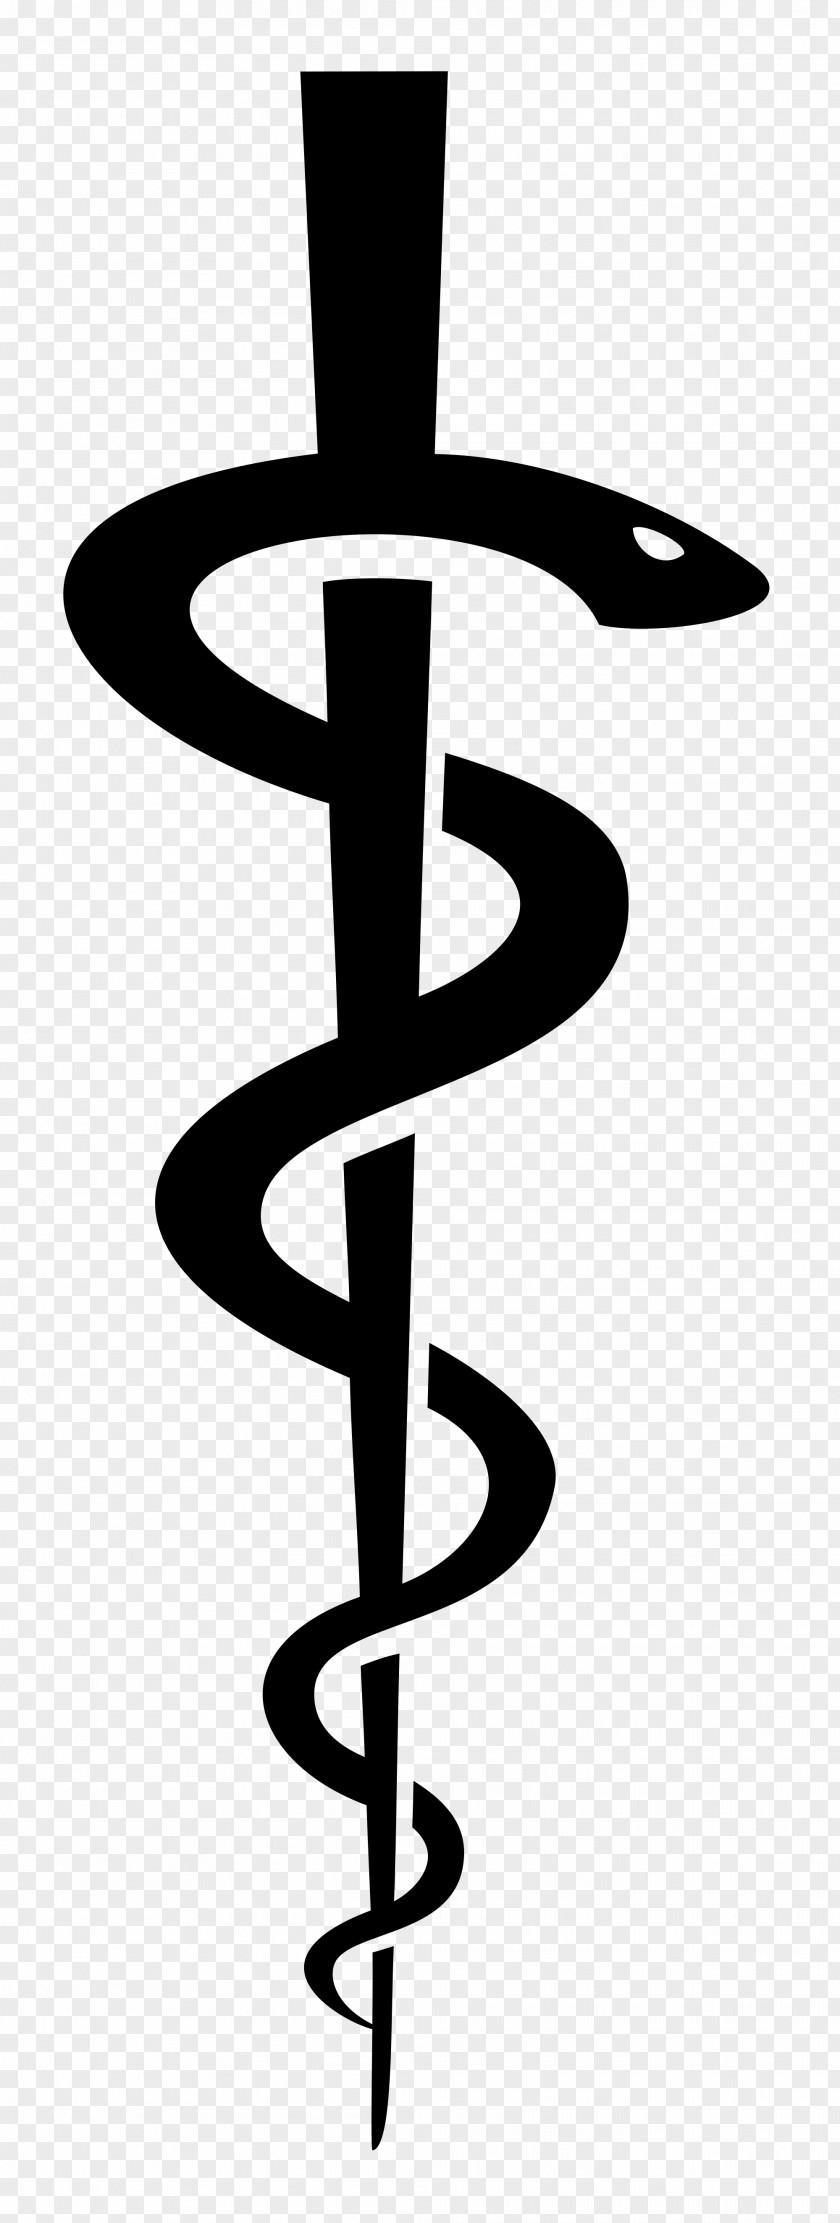 Rod Of Asclepius Staff Hermes Caduceus As A Symbol Medicine Oral And Maxillofacial Surgery PNG of as a symbol medicine and maxillofacial surgery, symbol, silhouette snake stick art clipart PNG